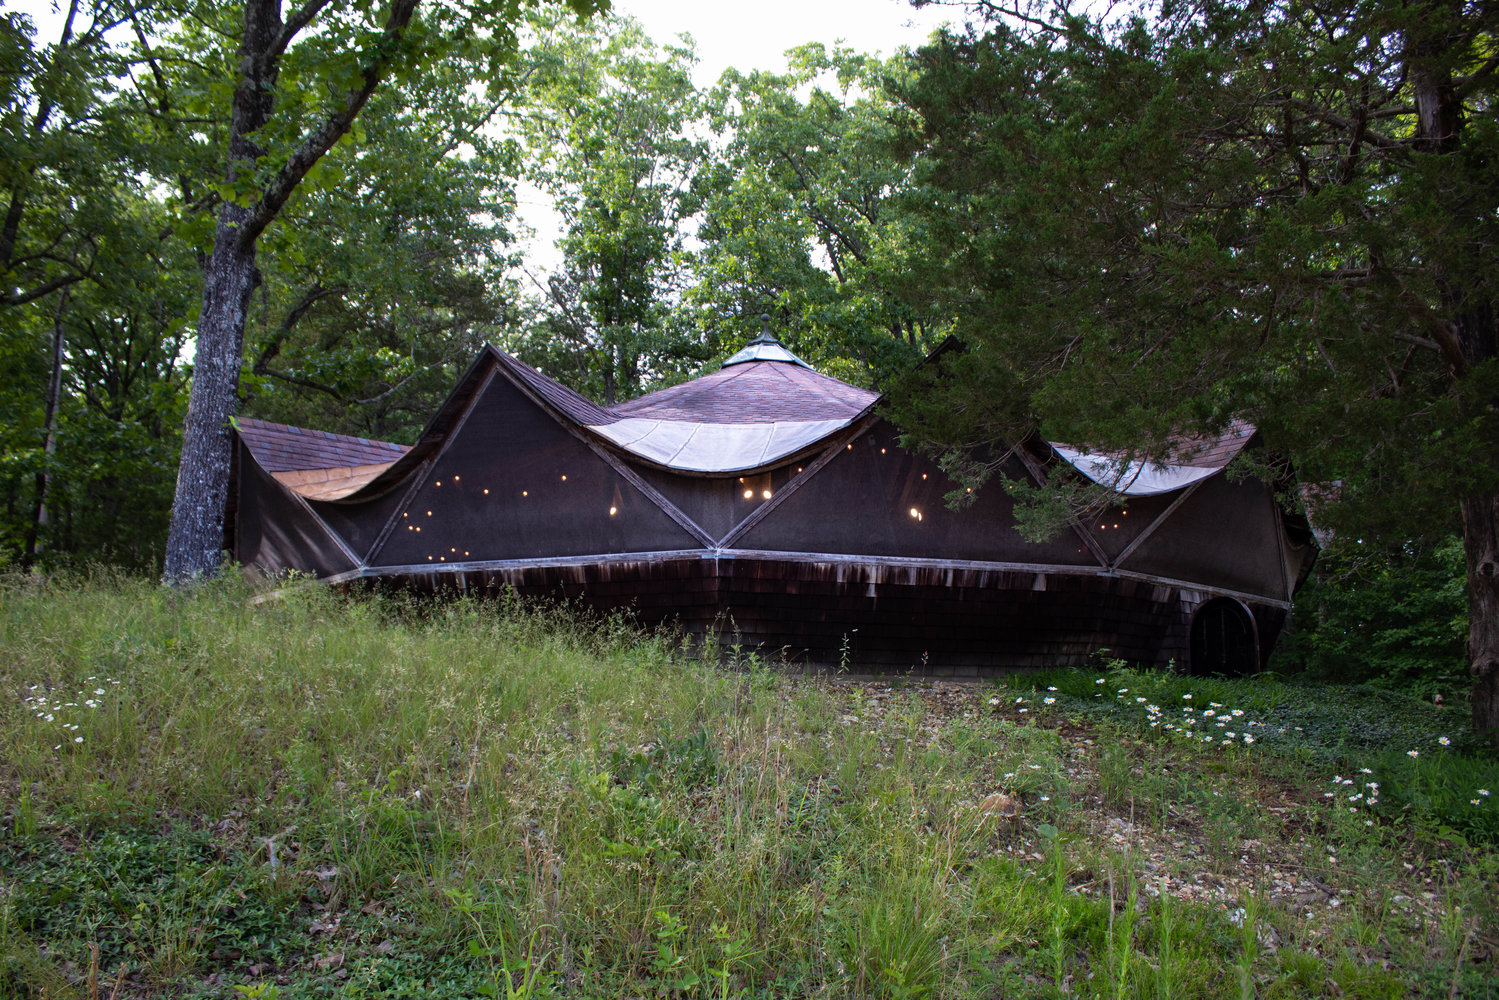 The Forest Garden Yurts event space, visible from the highway, is the right venue for certain super-chill couples.